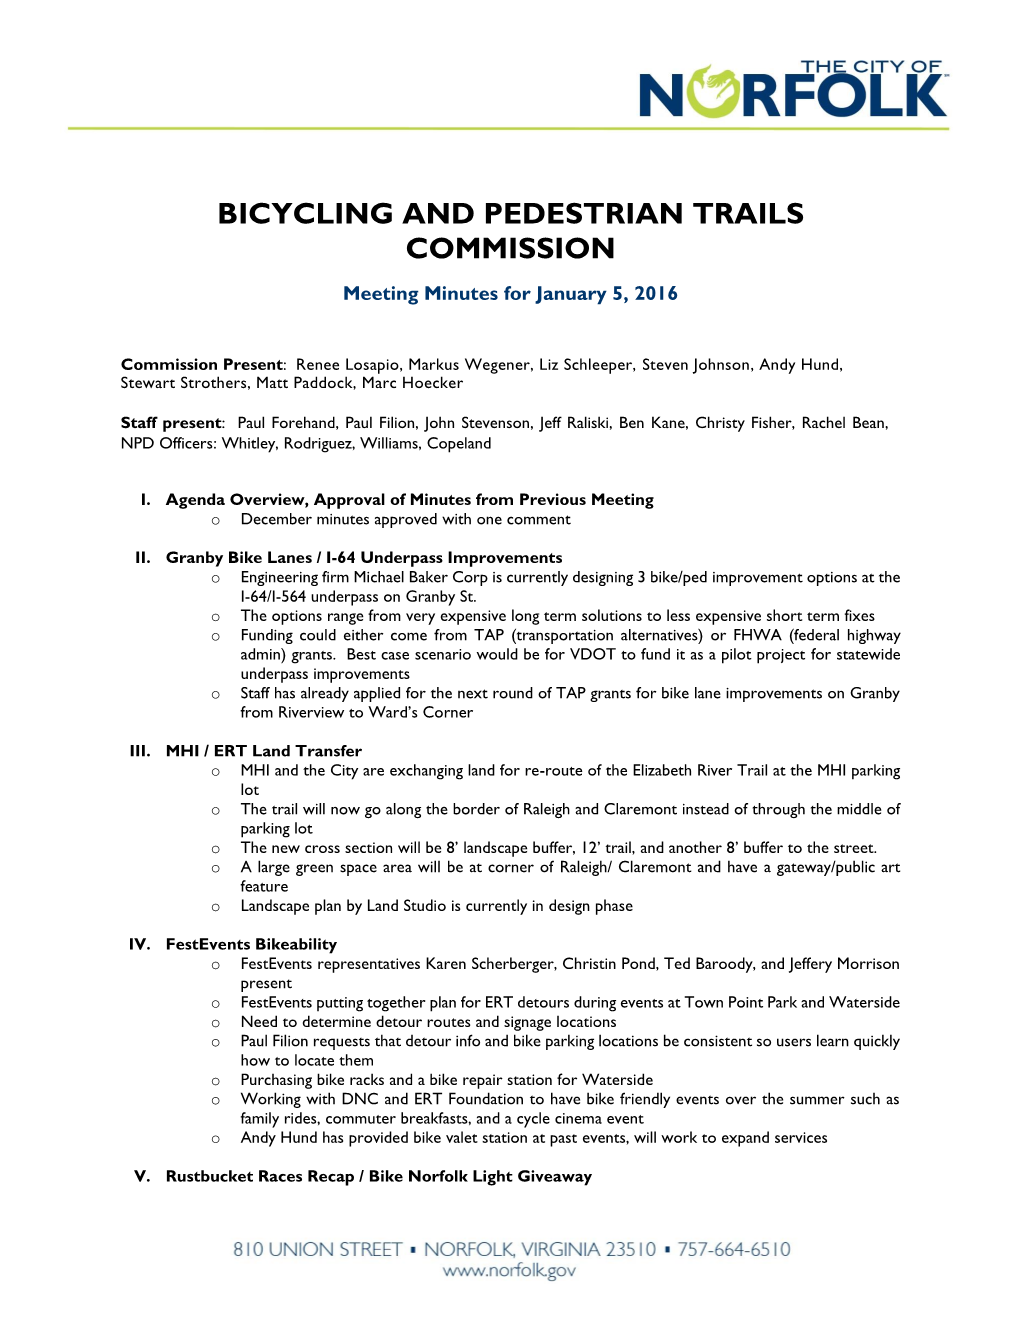 Bicycling and Pedestrian Trails Commission